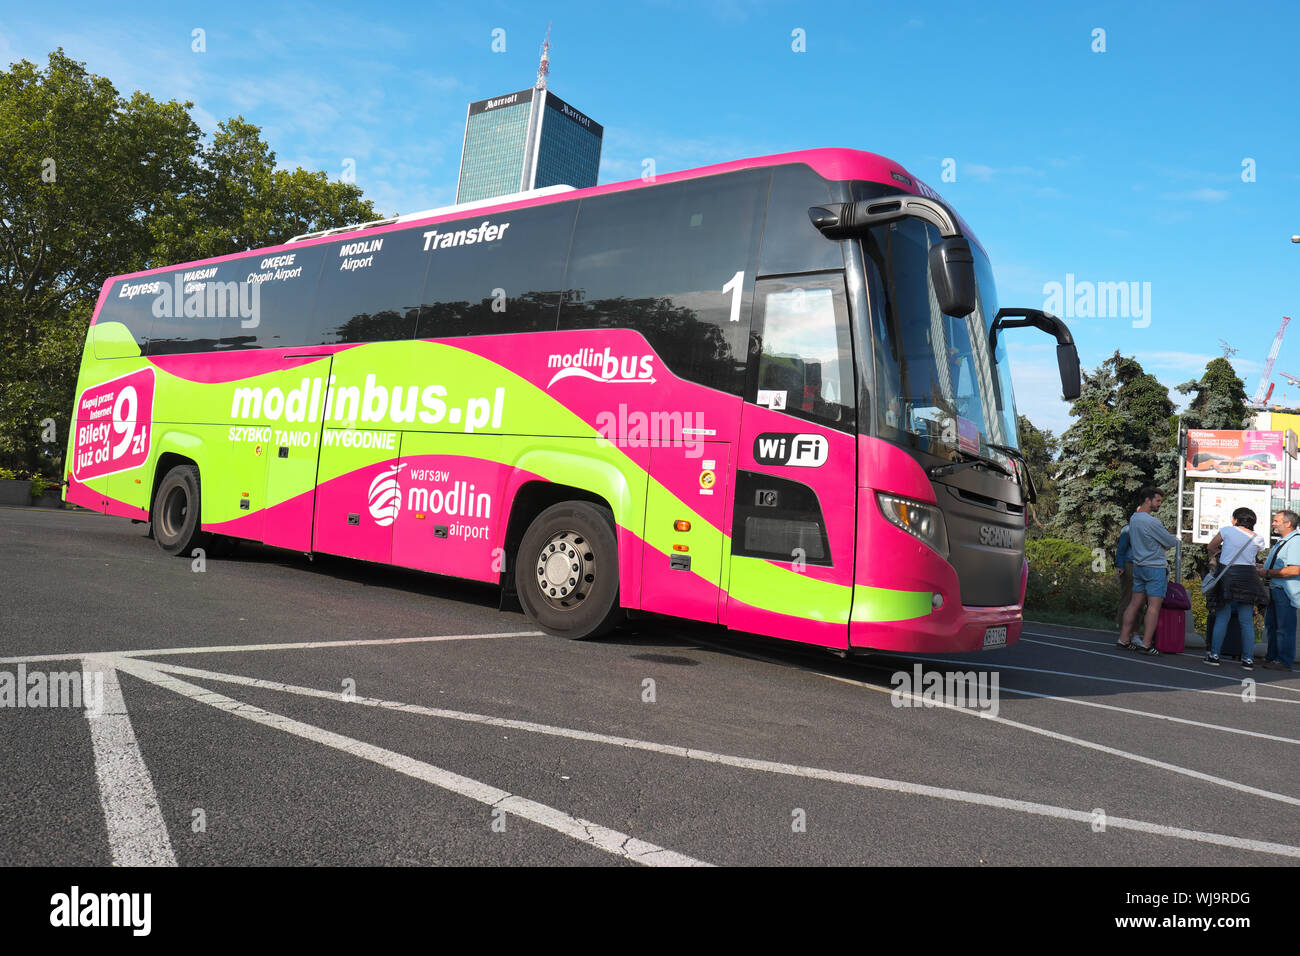 Warsaw Poland - the Modlin Bus operates a passenger bus service between Warsaw city centre ( shown ) and Modlin Airport to the north of Warsaw Stock Photo